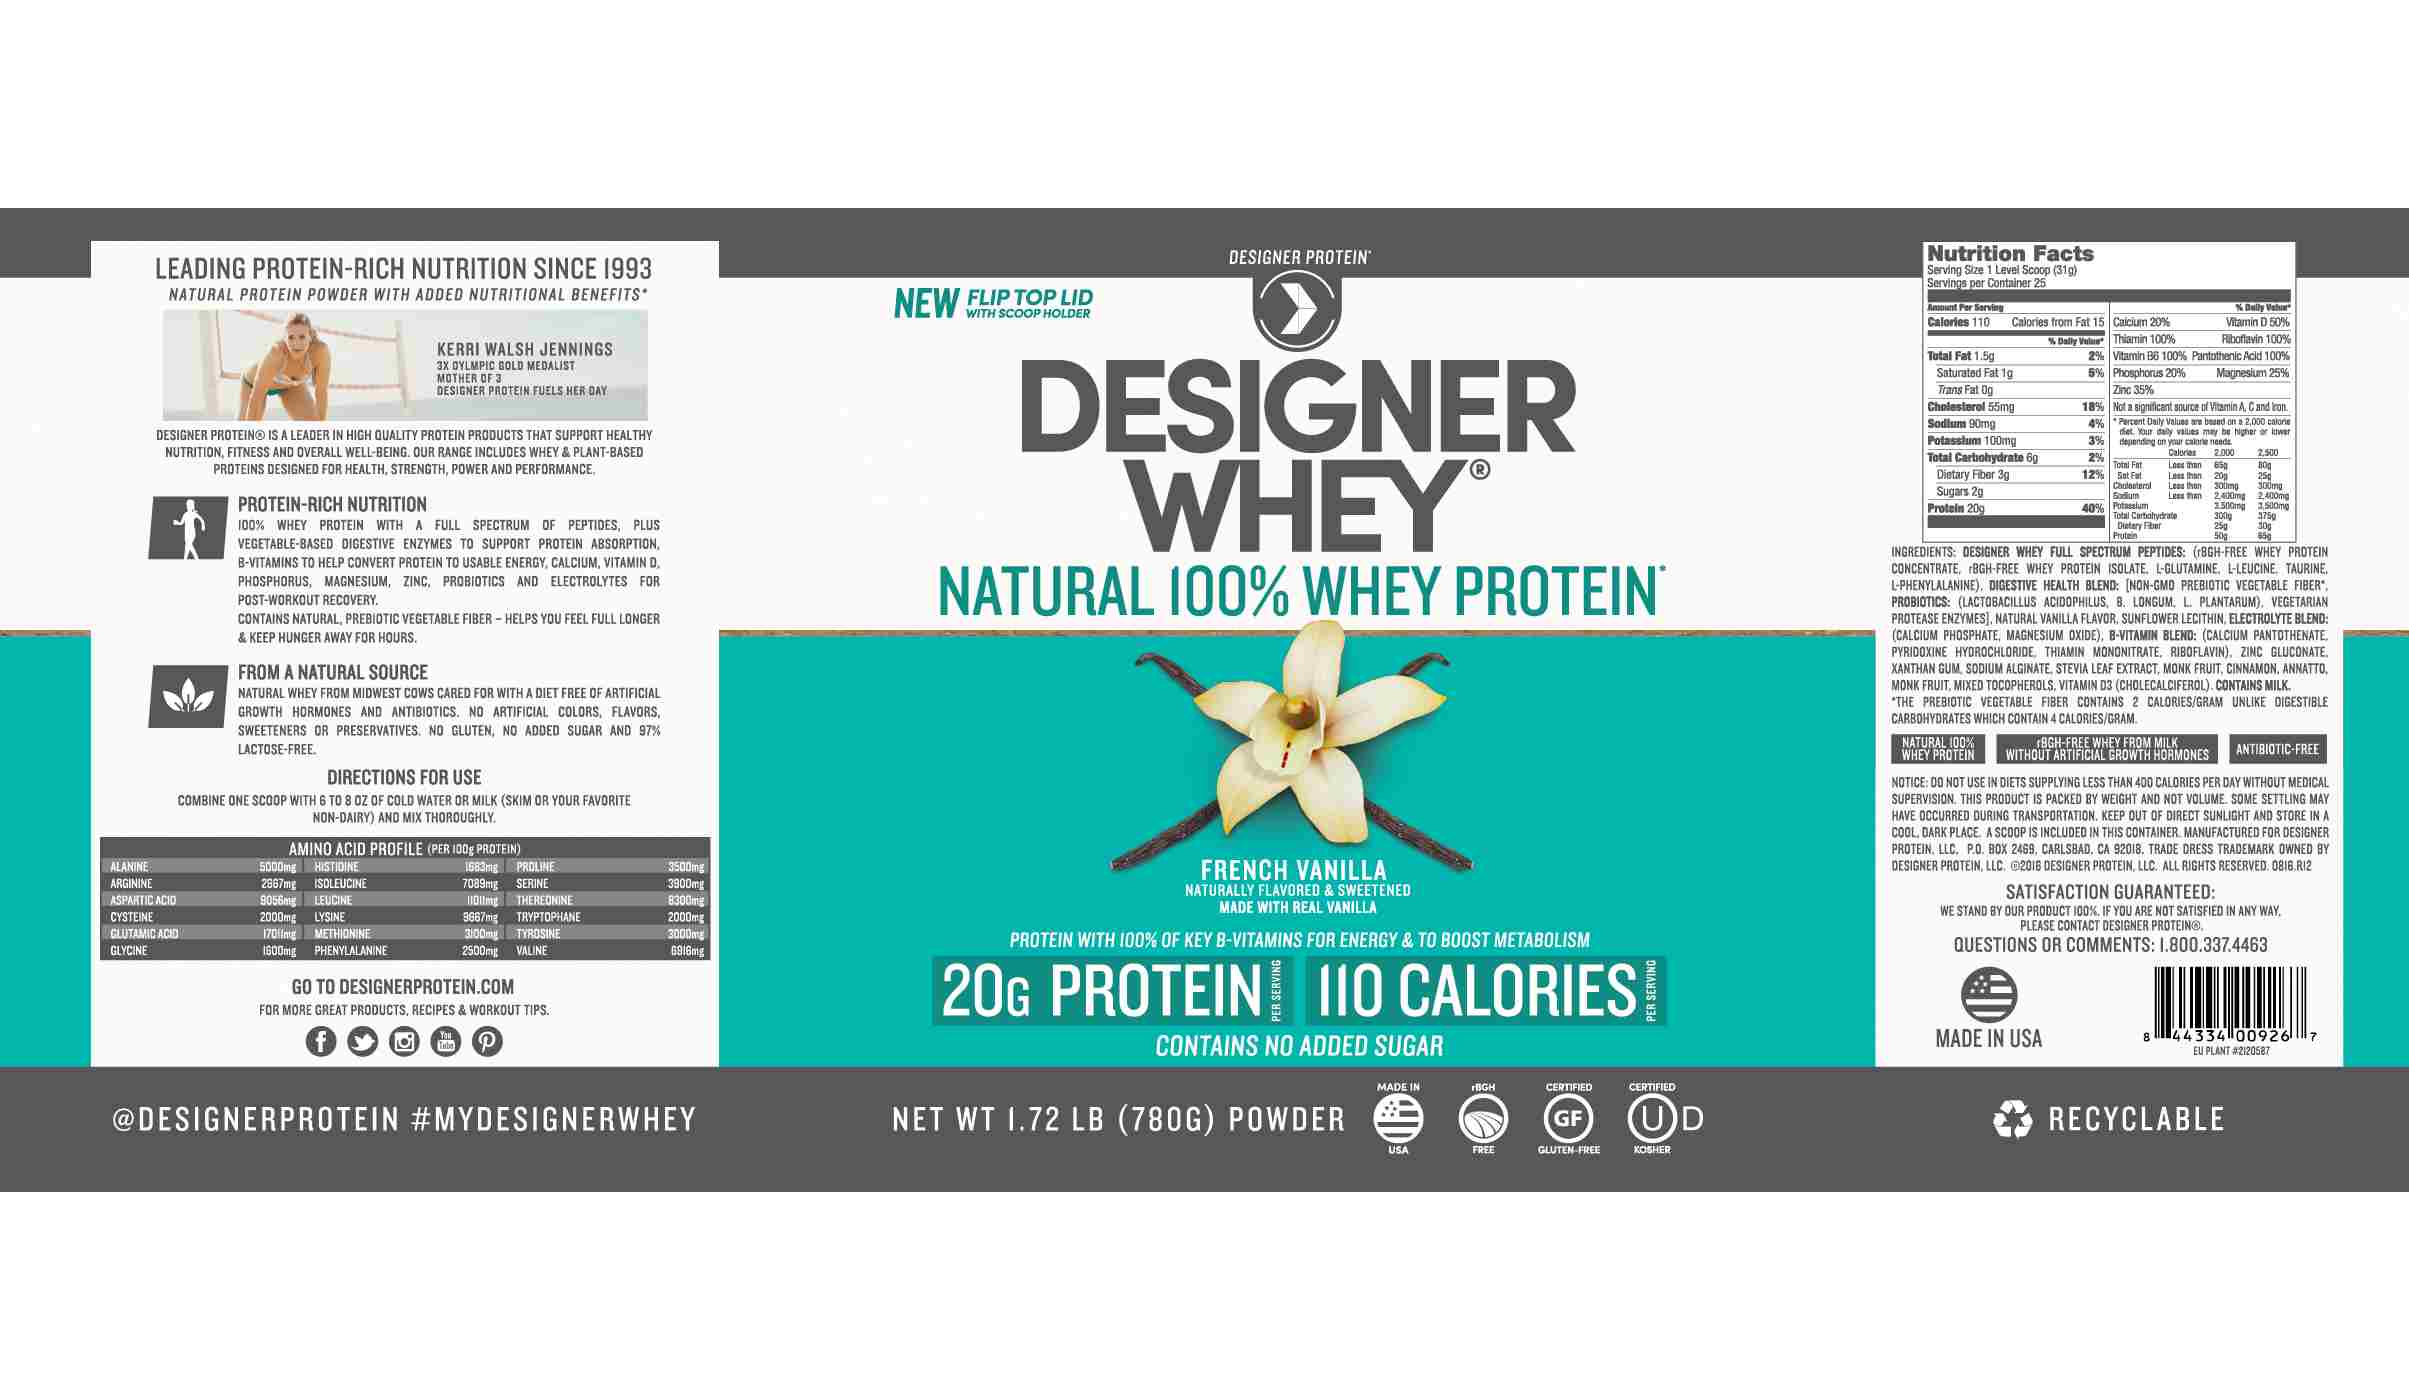 Designer Whey Natural 100% Whey Protein - French Vanilla; image 2 of 2